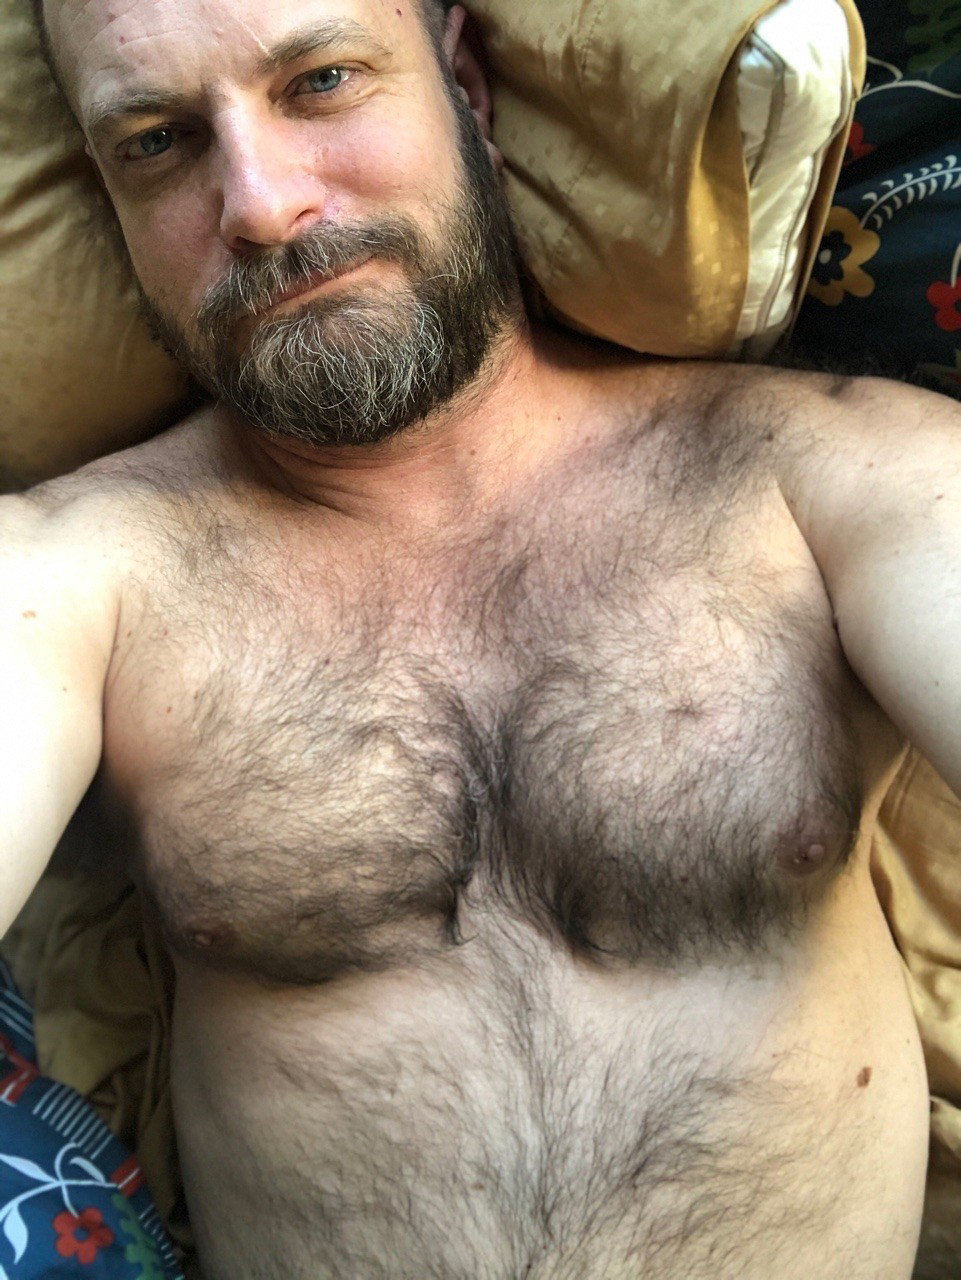 Photo by Smitty with the username @Resol702,  March 4, 2019 at 8:43 PM. The post is about the topic Gay Hairy Men